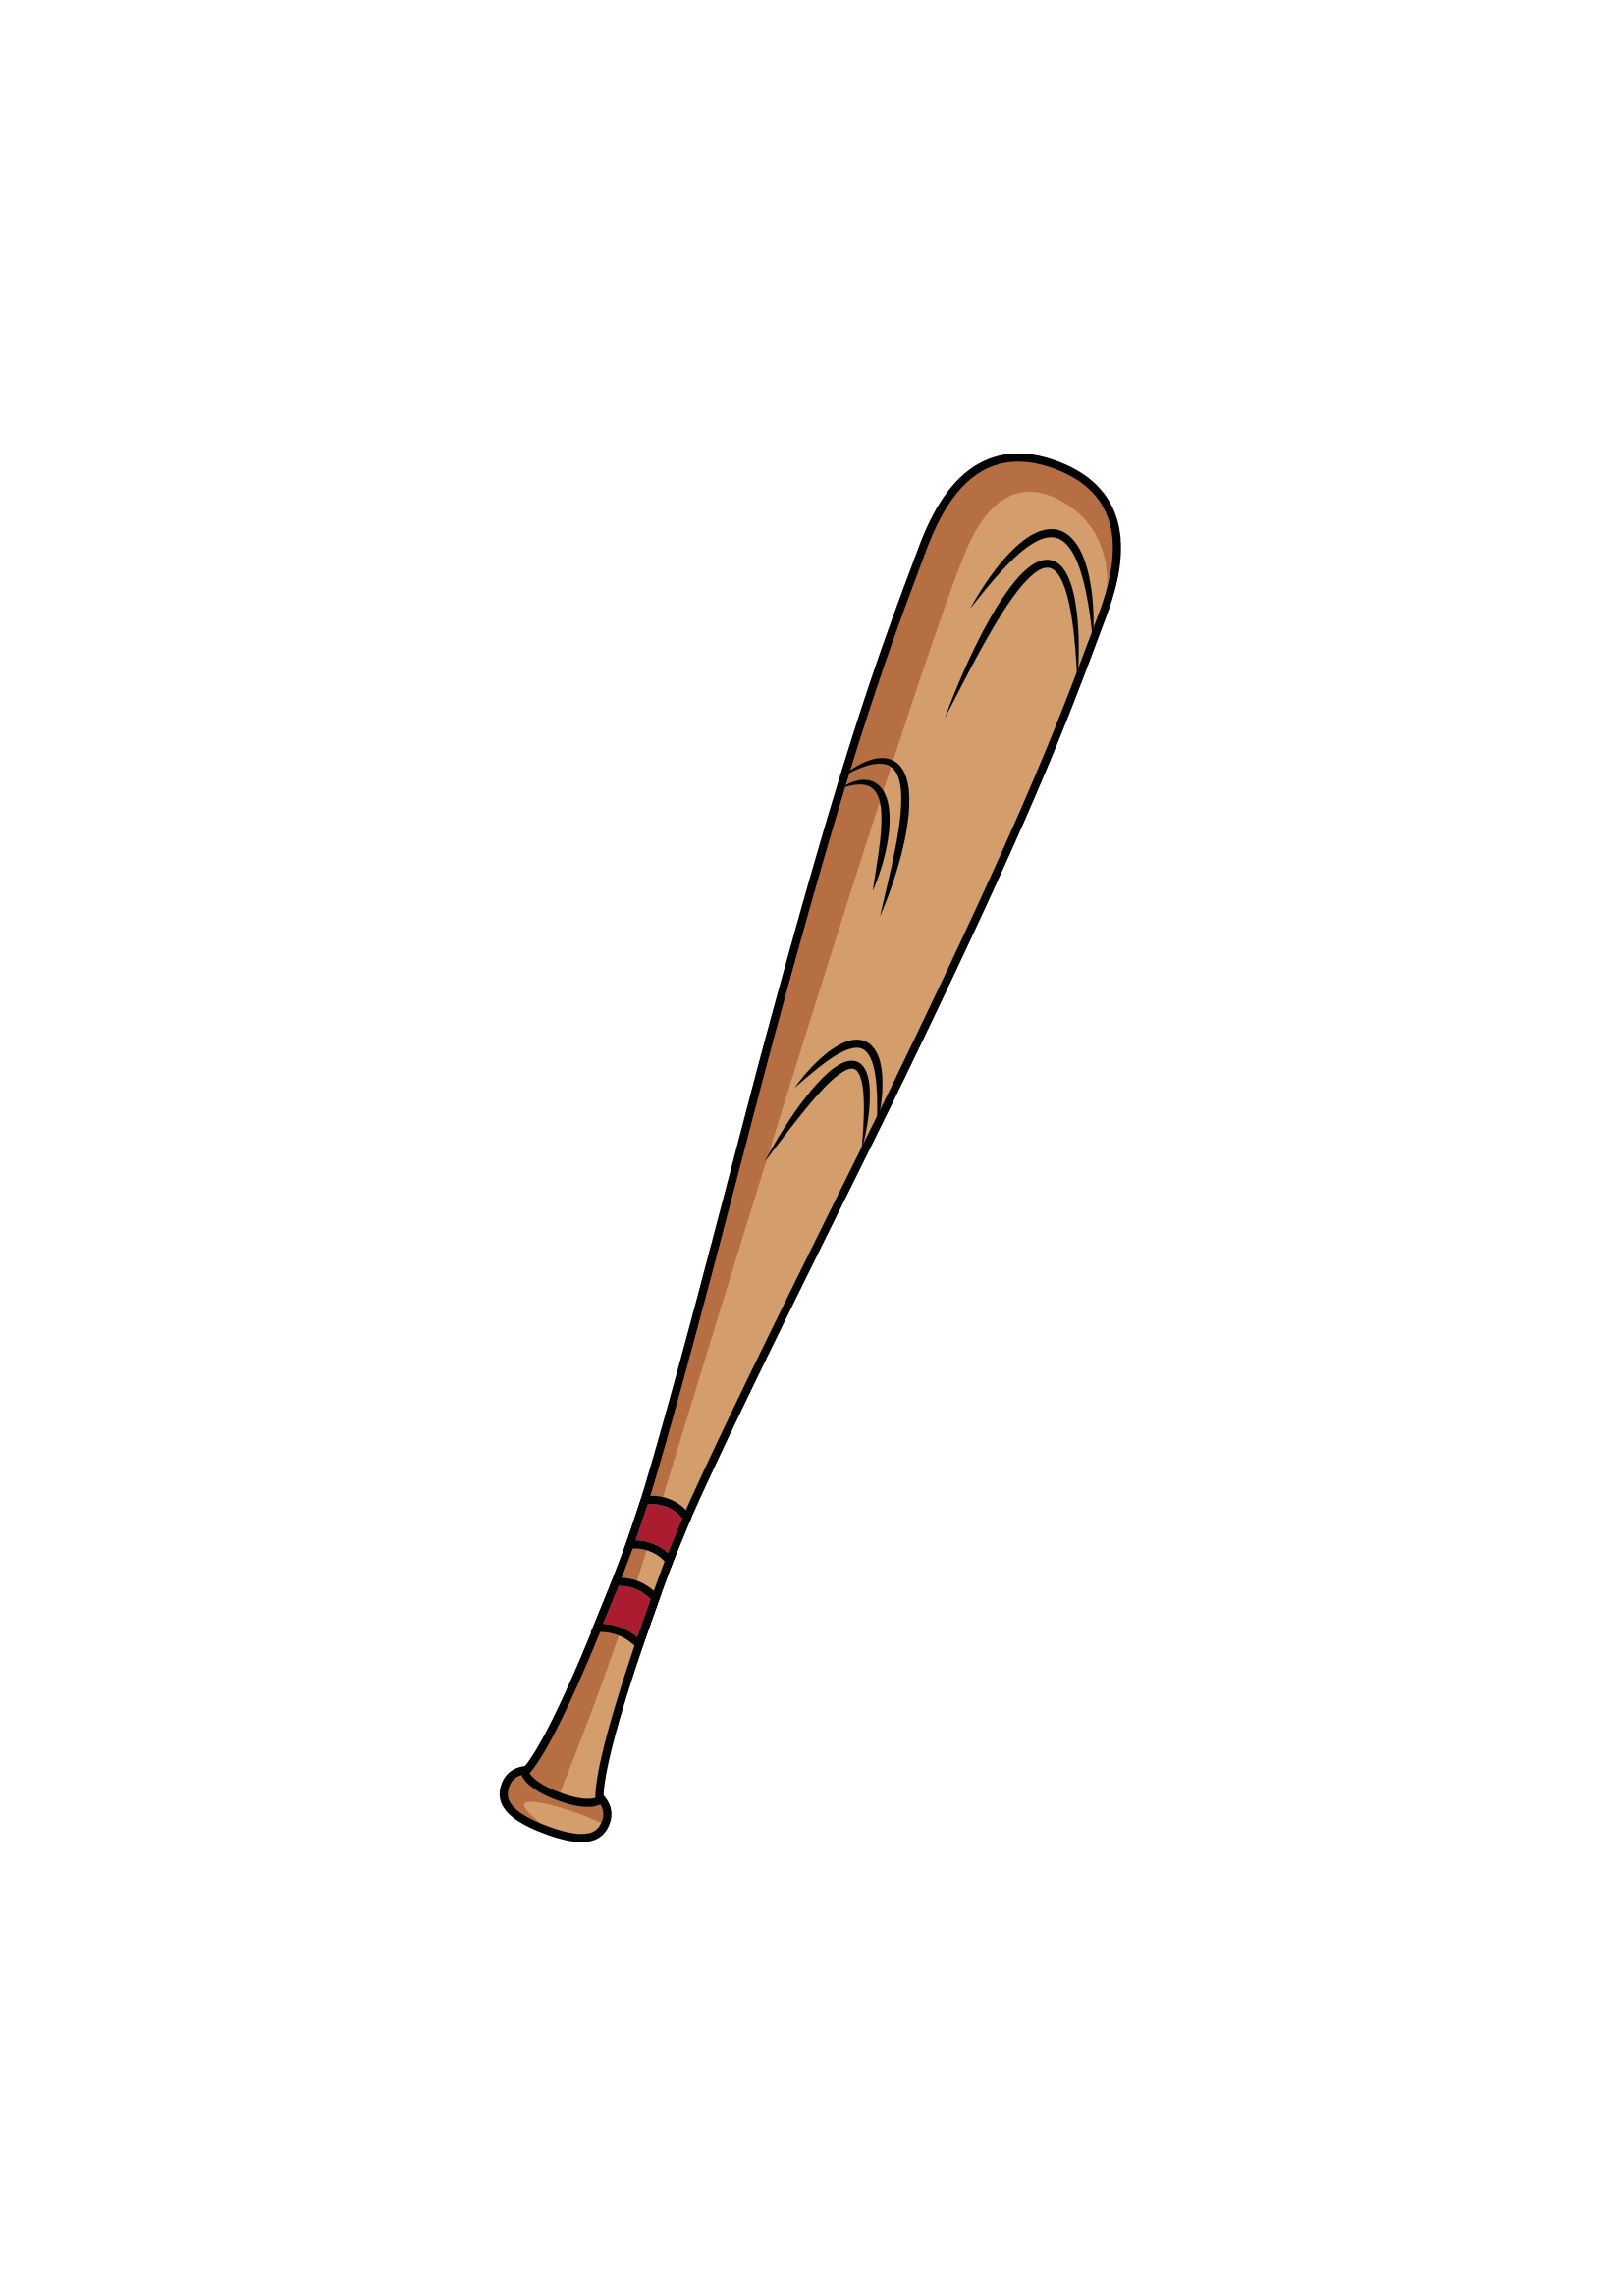 How to Draw A Baseball Bat Step by Step Printable